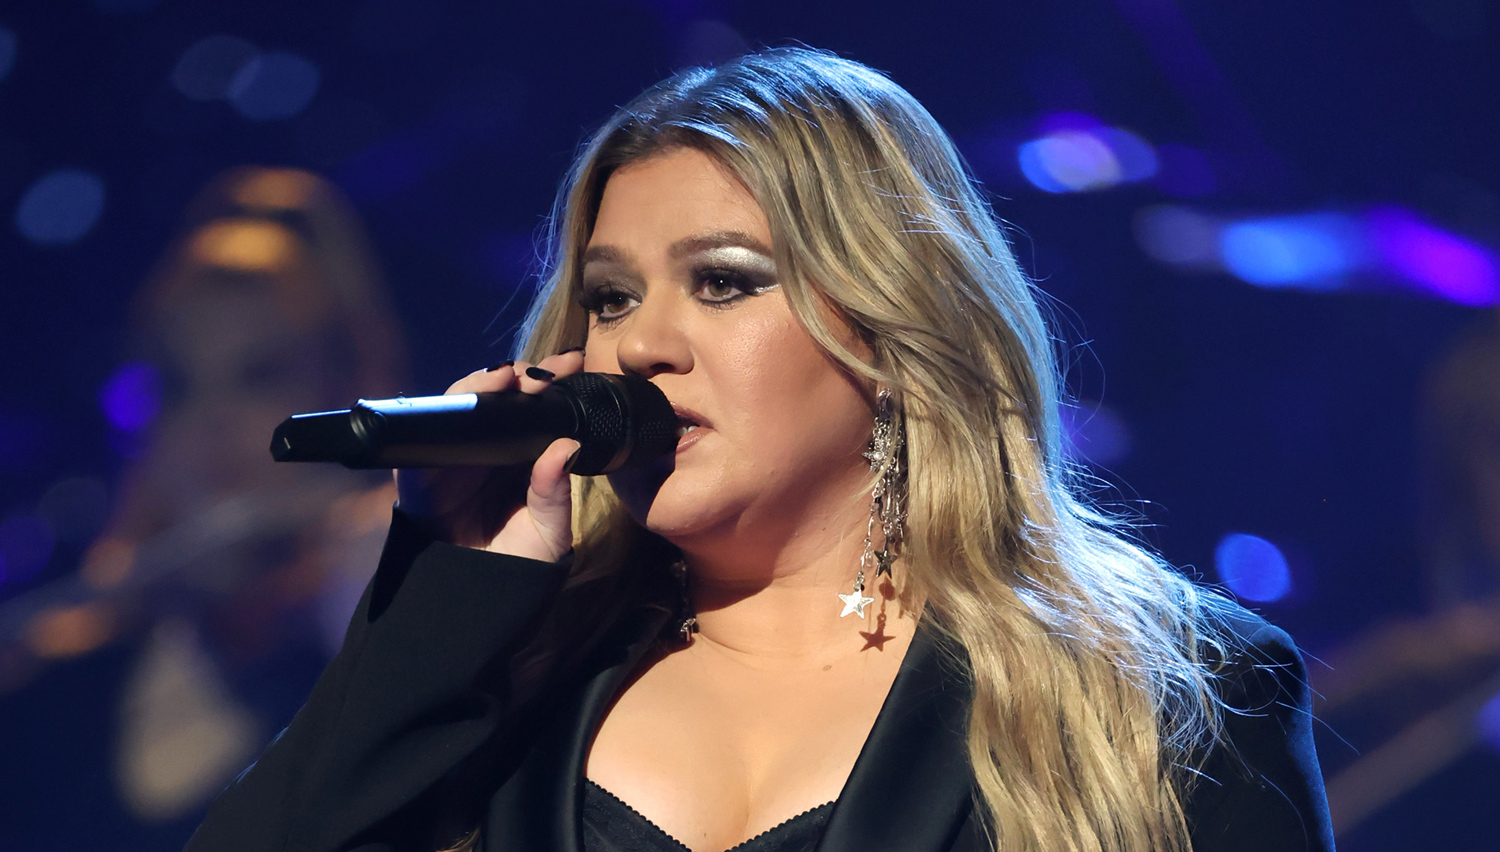 Kelly Clarkson Releases ‘Me’ & ‘Mine’ Songs, Explains Meaning of ‘Chemistry’ Album Title, Reveals Track List!